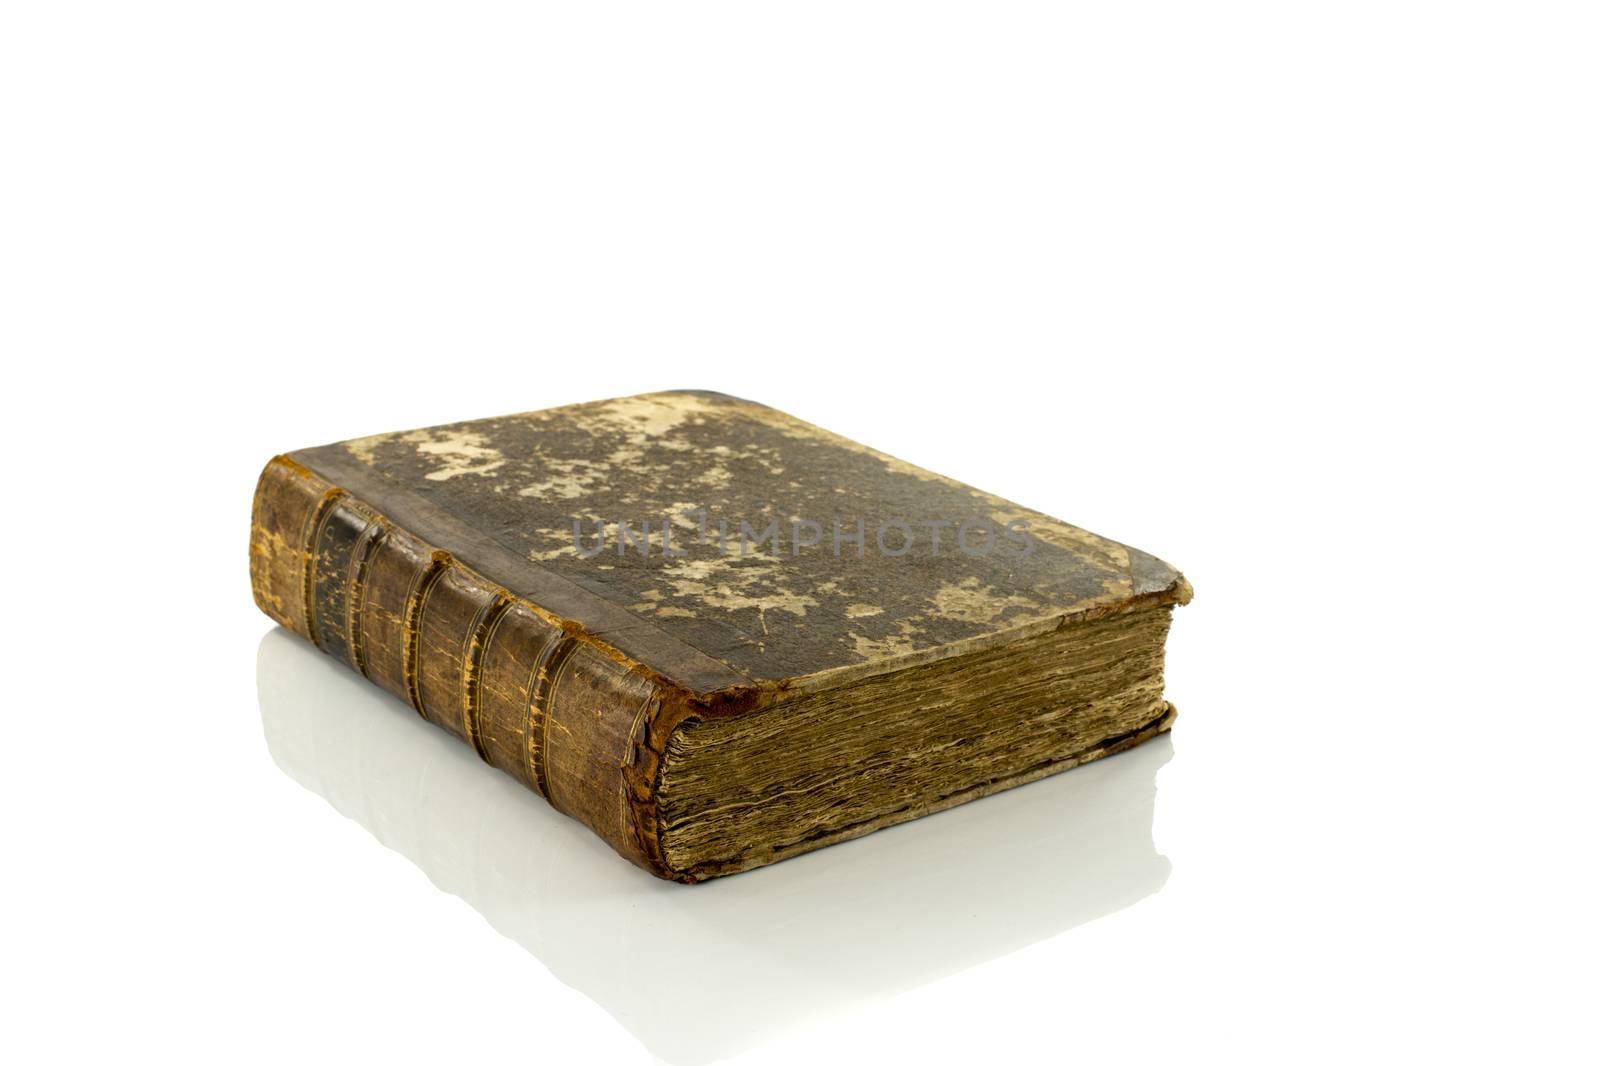 old book as a bible isolated on white